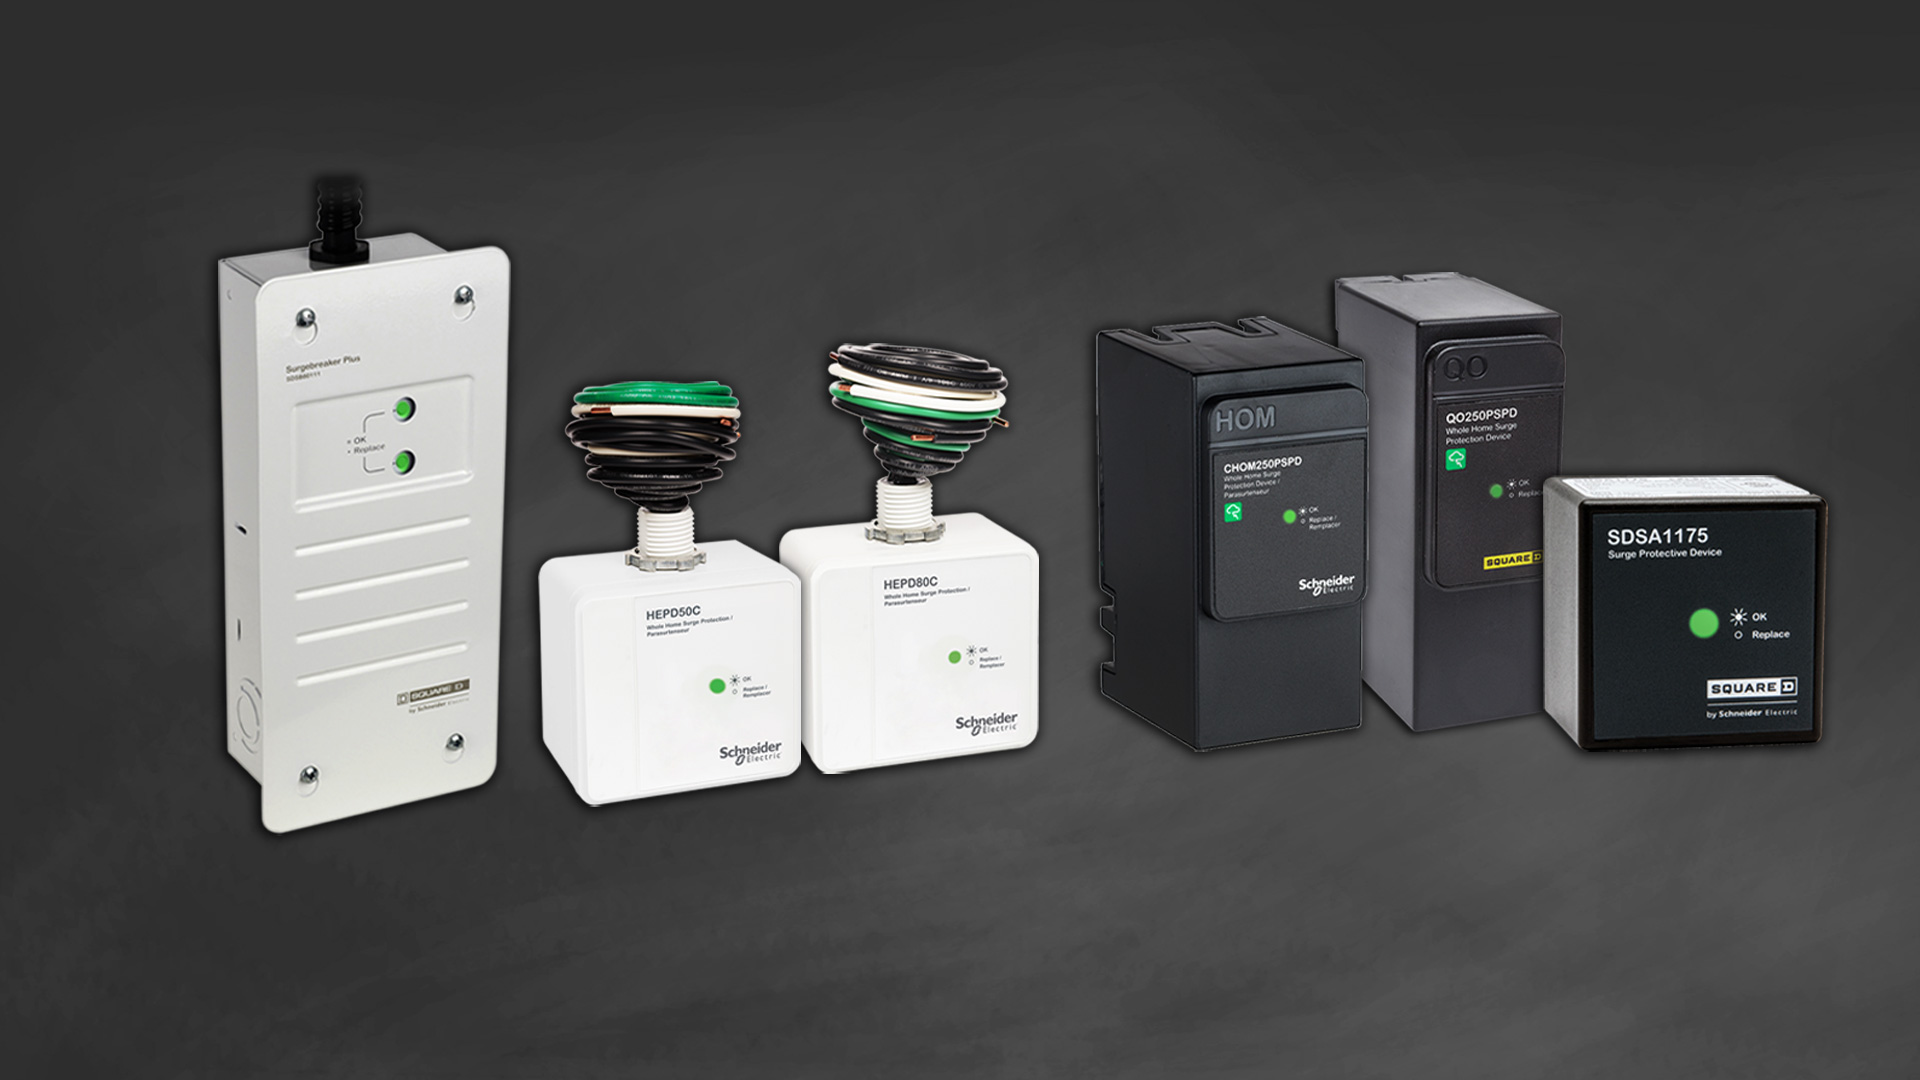 Surge protection products